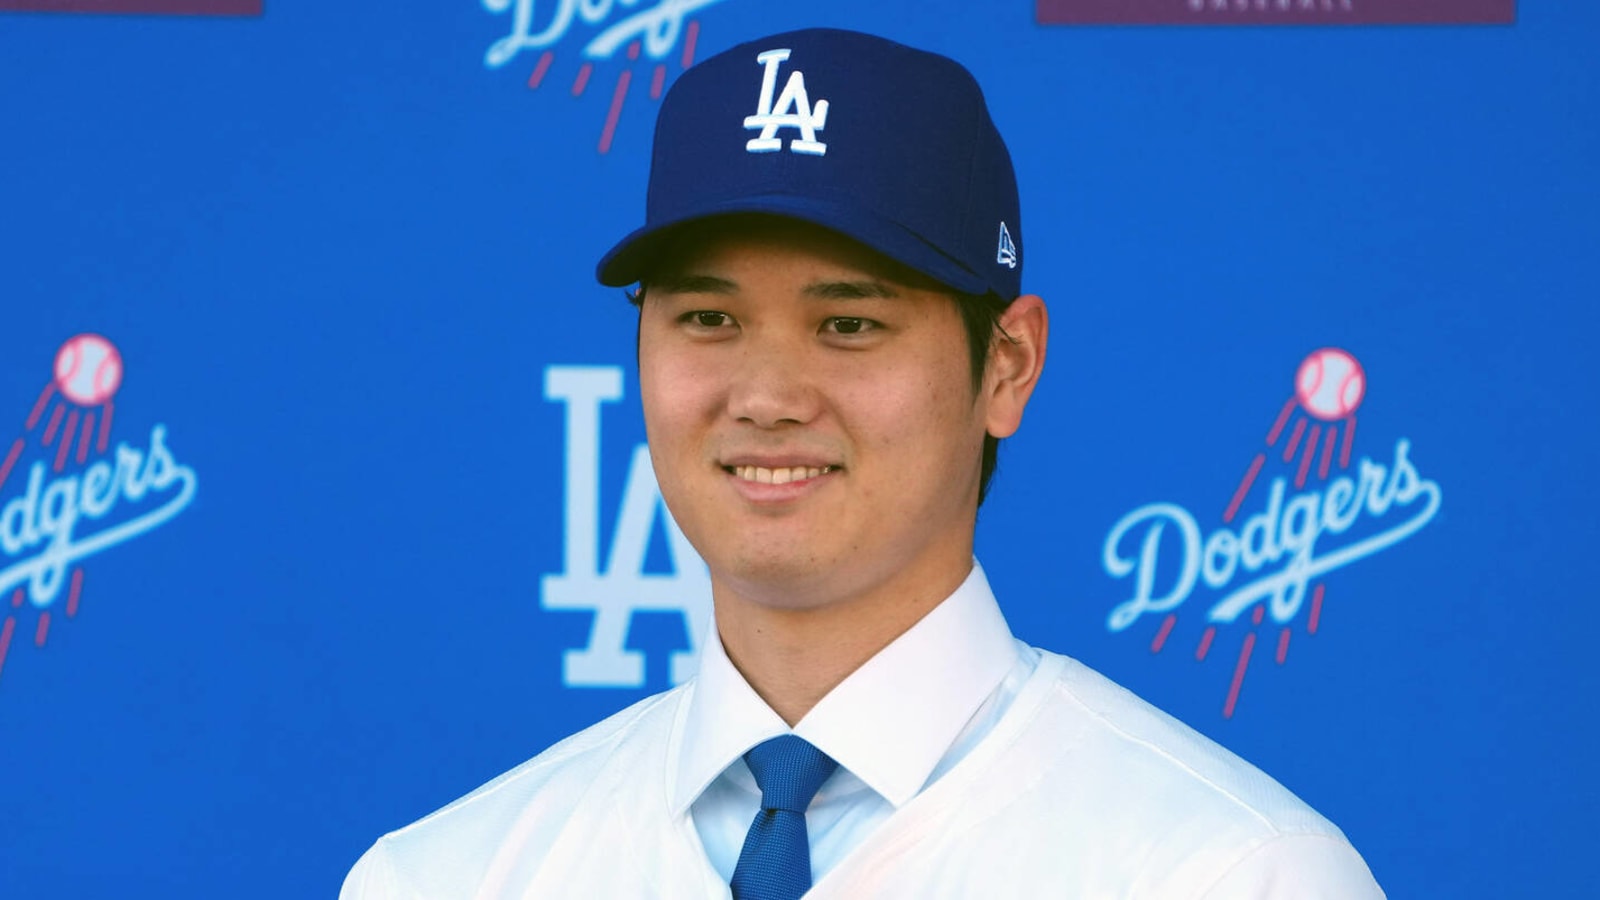 Watch: Hype video shows Shohei Ohtani working out at Dodger Stadium